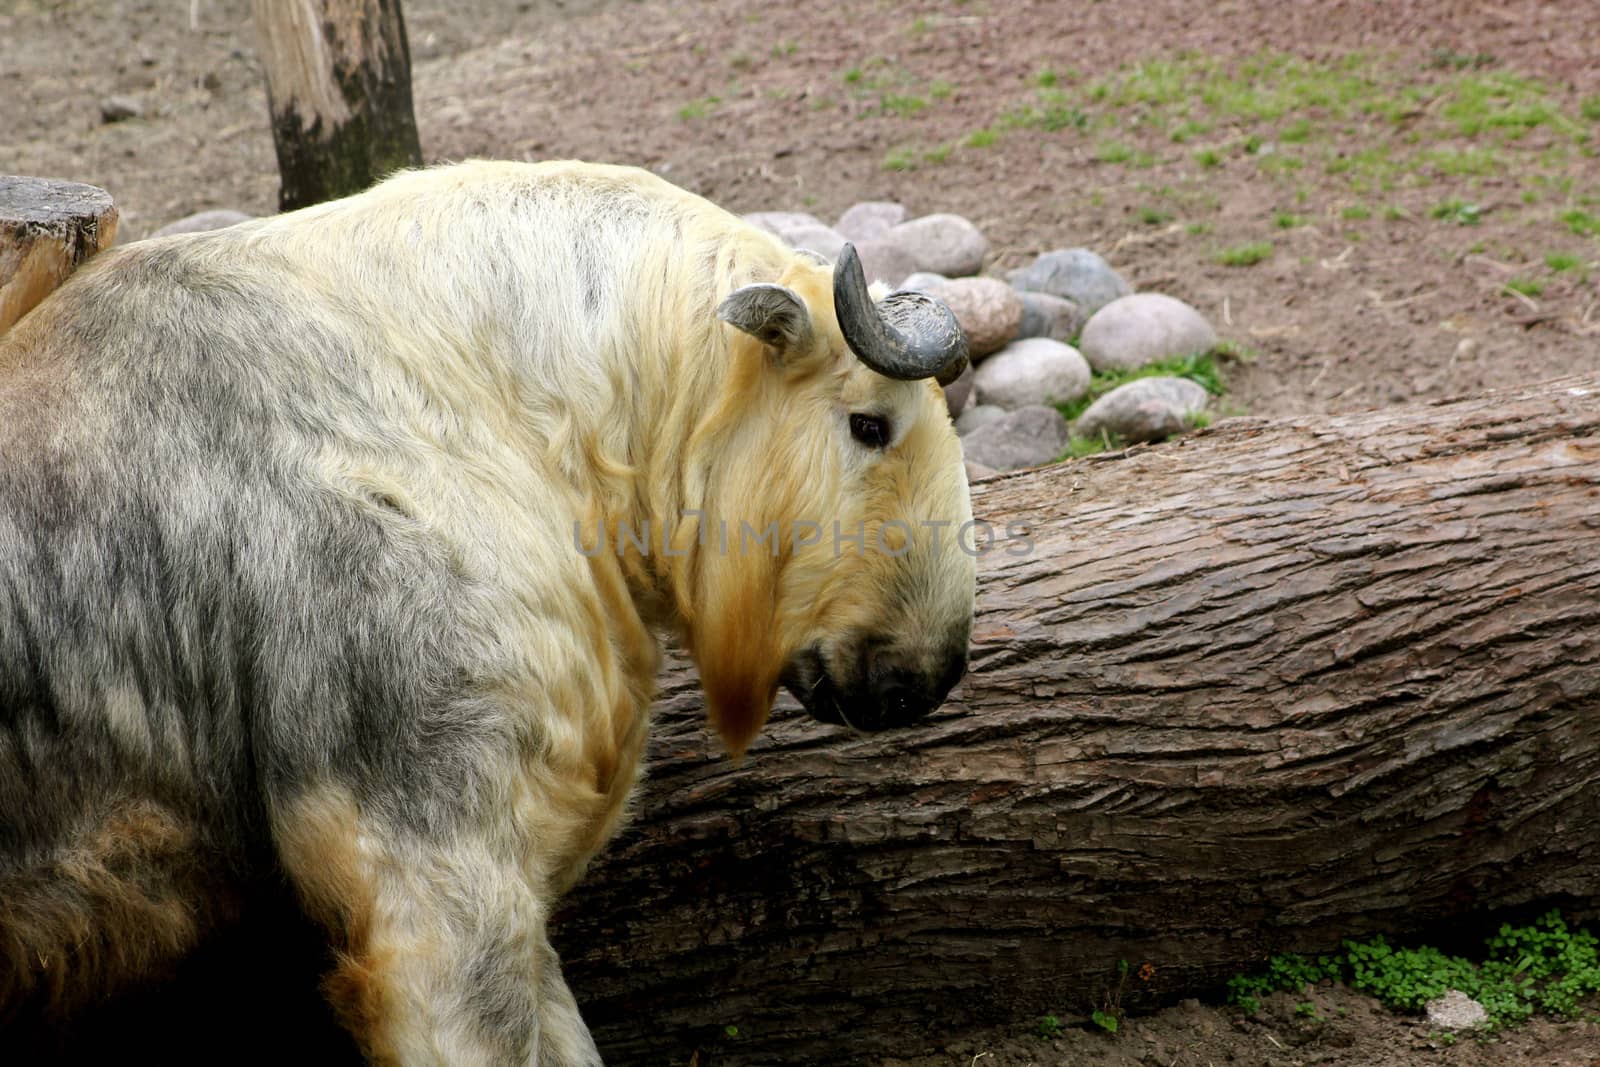 A large goat antelope, commonly known as Sichuan Takin (Budorcas Taxicolor Tibetana), at the Lincoln Park Zoo, Chicago, Illinois, USA